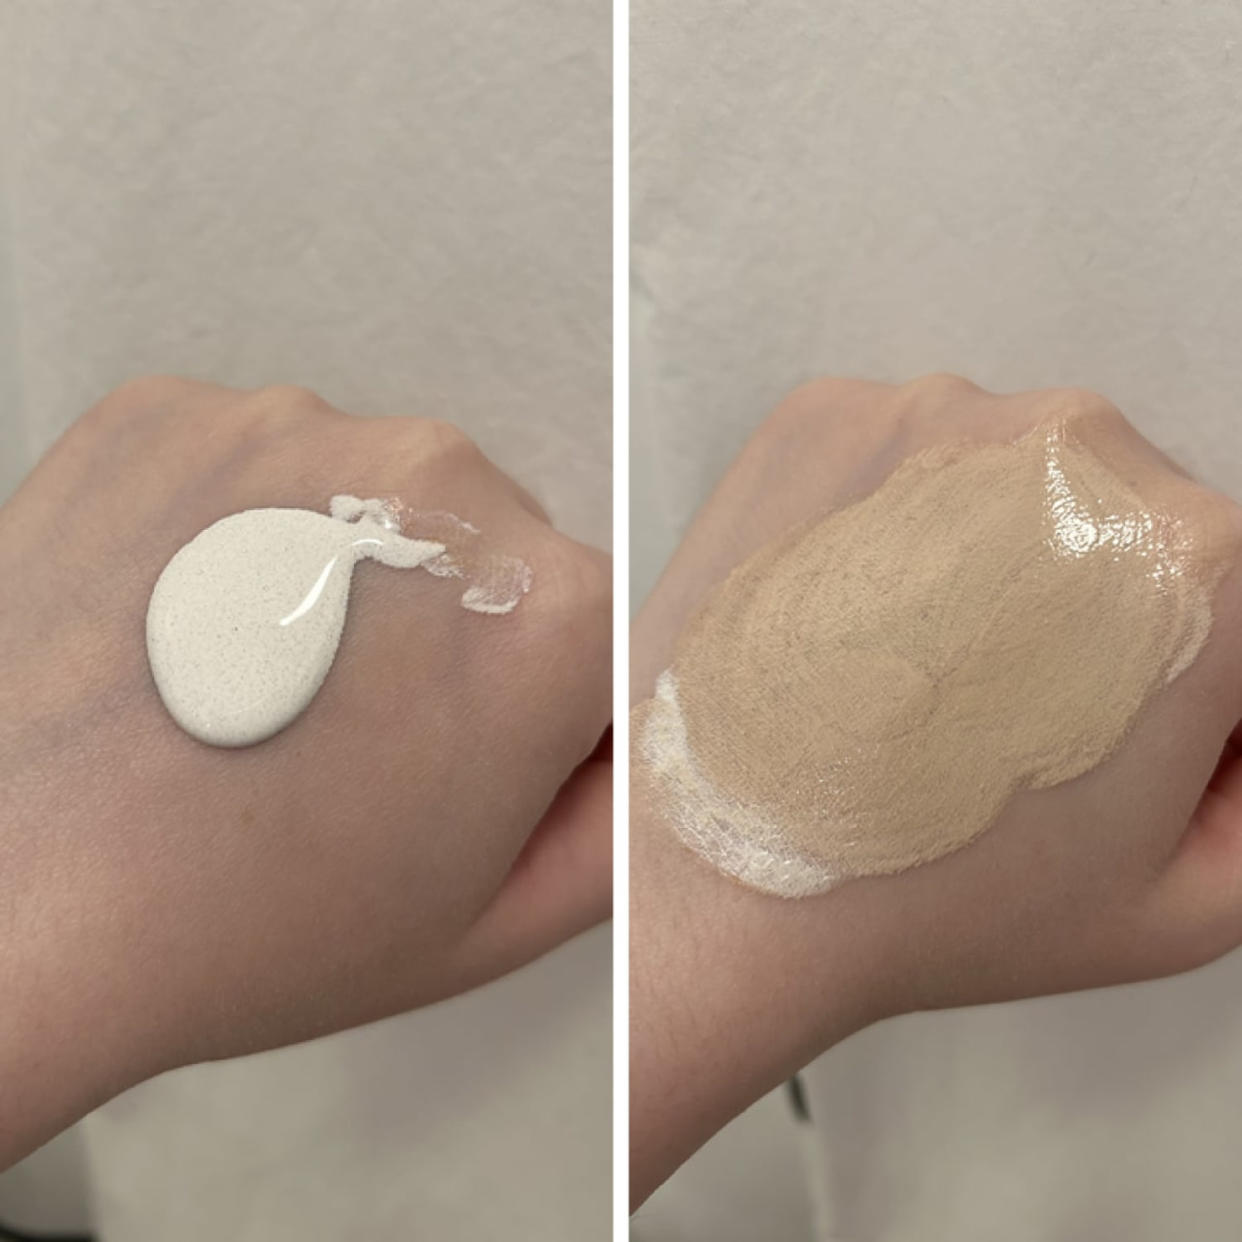 Colorescience’s Sunforgettable Total Protection Face Shield Flex SPF 50 comes out white (left), but it adjusts to your skin tone as it’s rubbed in (right). (Courtesy Lindsay Schneider, NBC Select commerce editor)